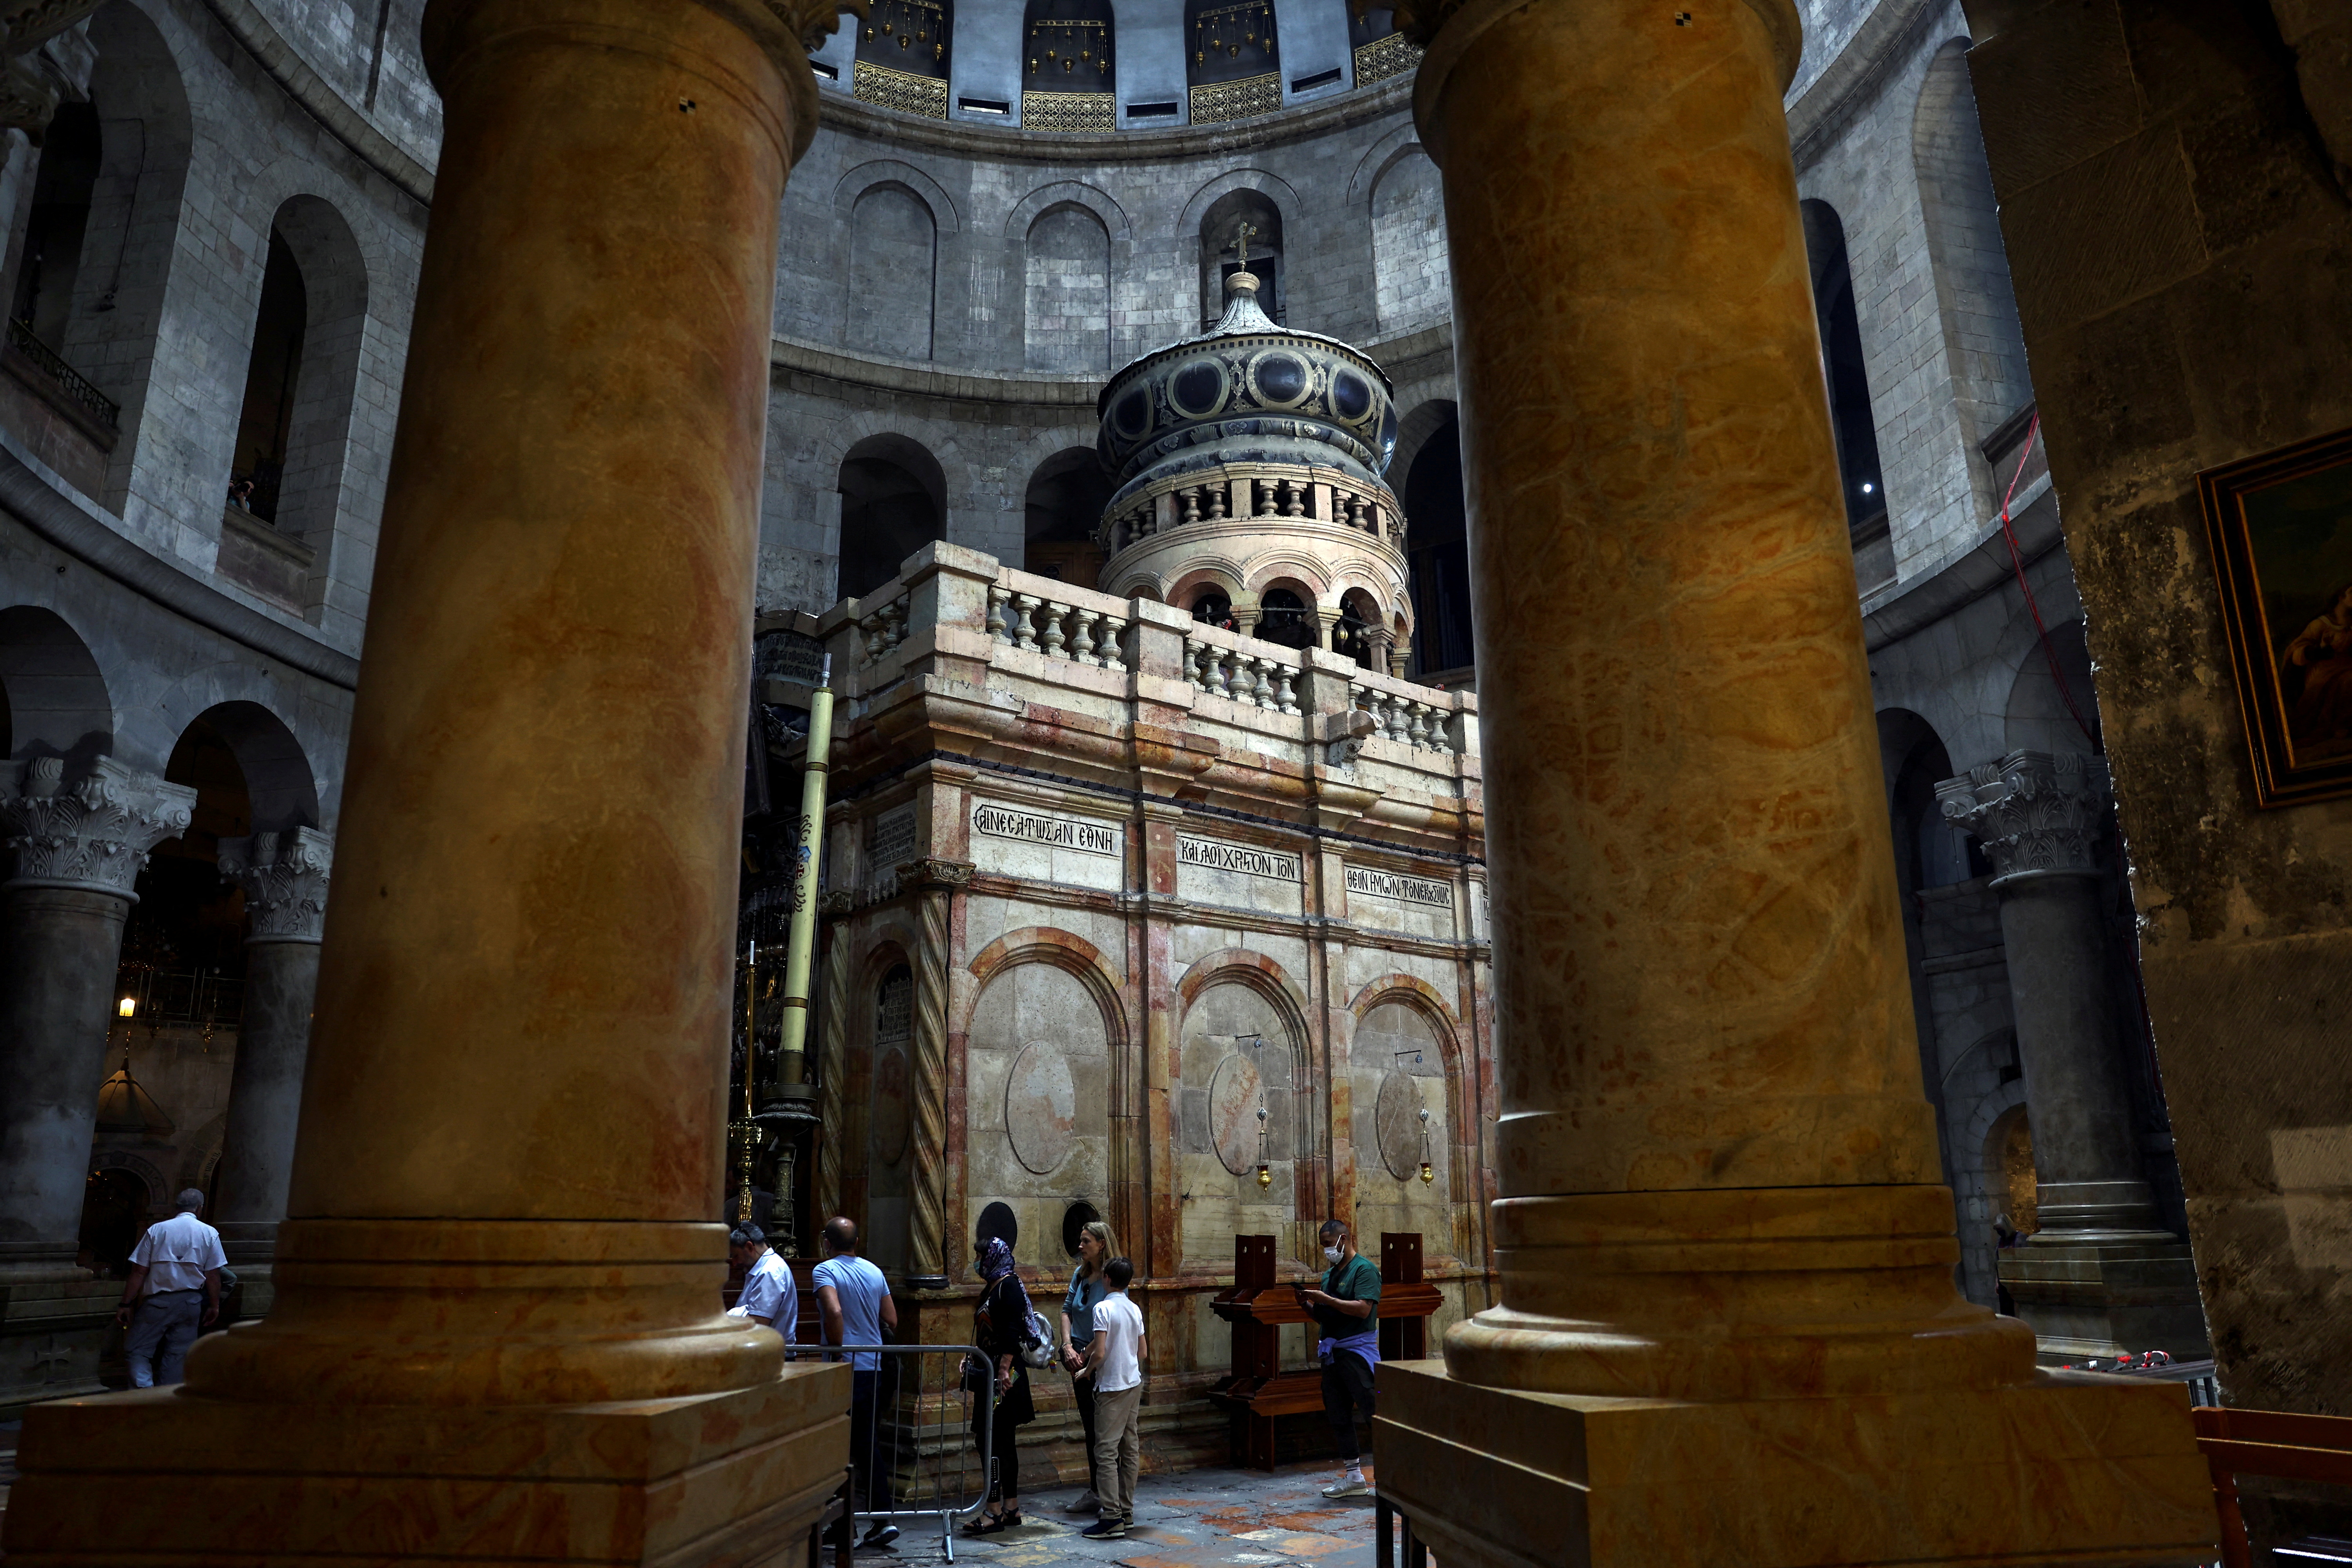 People visit the Church of the Holy Sepulchre in Jerusalem's Old City